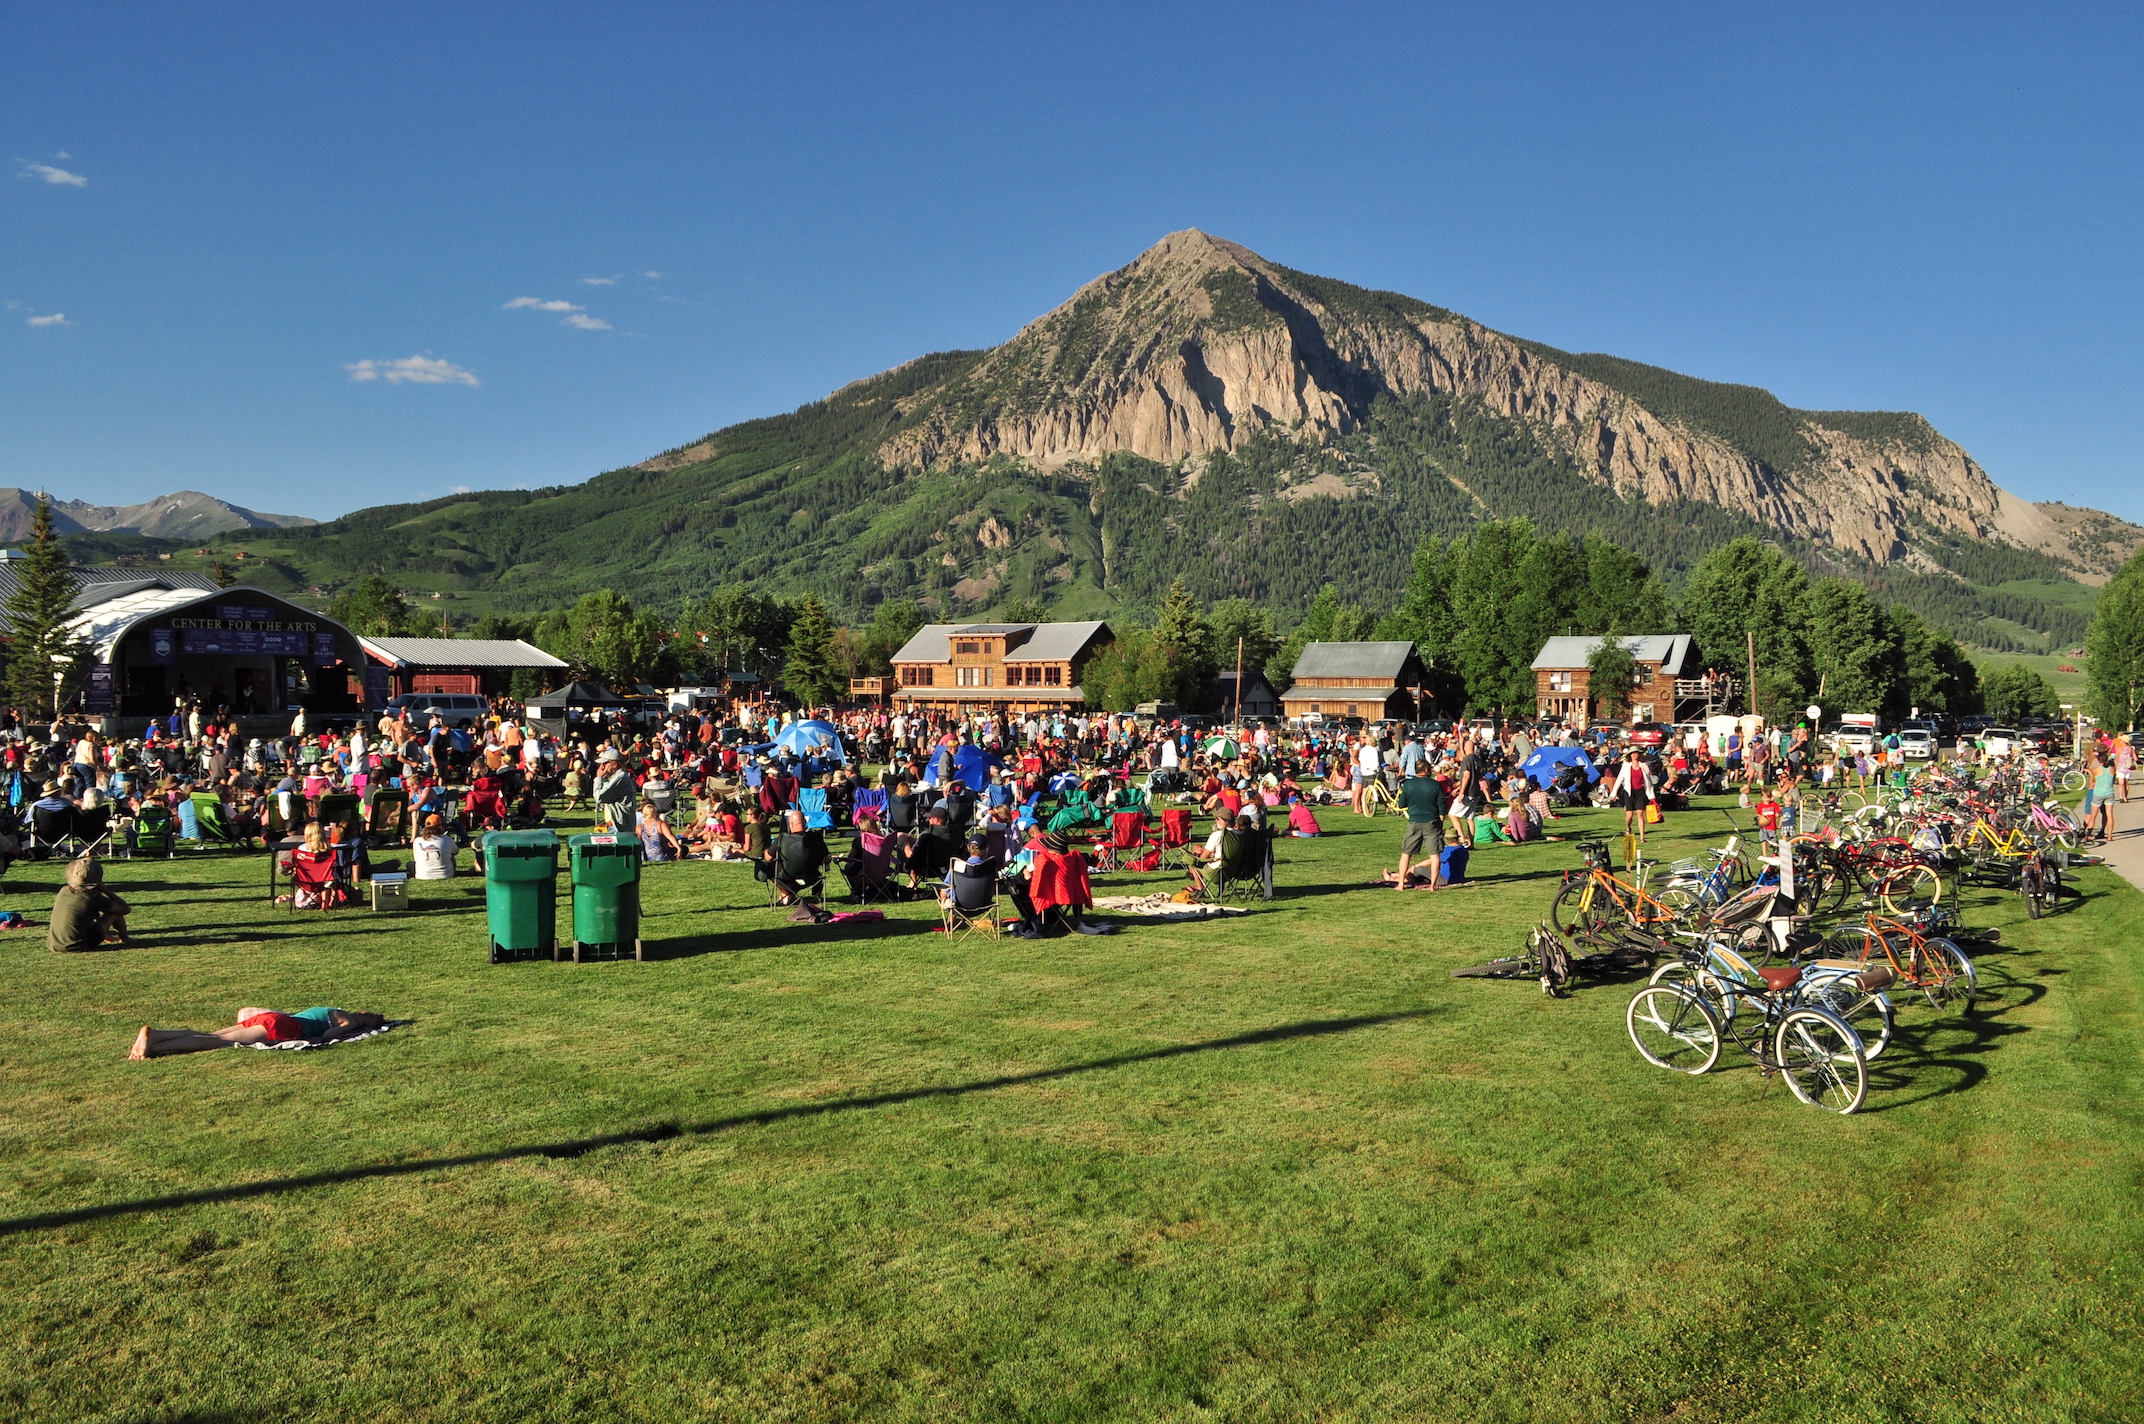 A lawn full of people sitting on chairs and blankets with a mountain peak in the background.